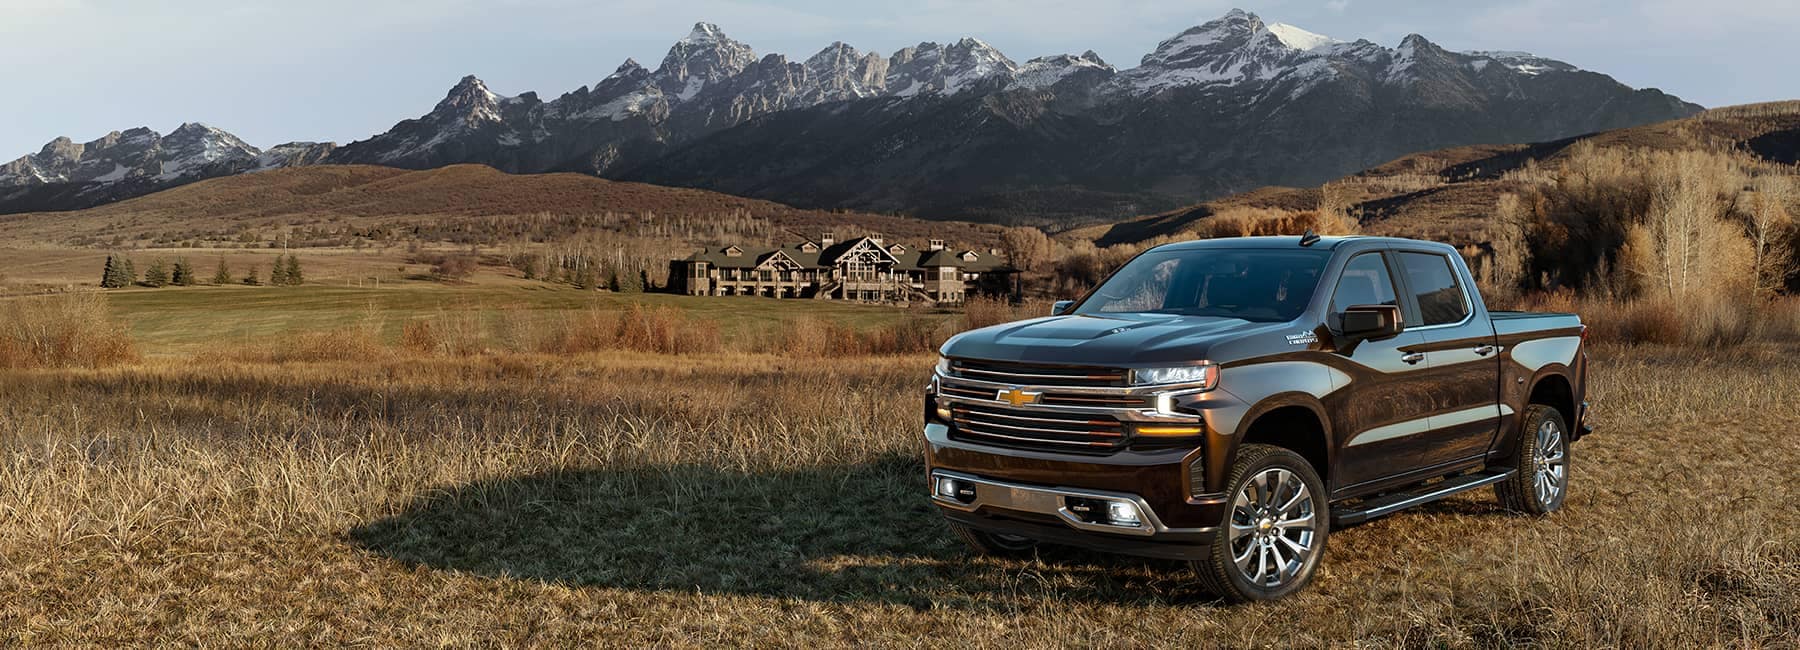 Dark 2021 Chevrolet Silverado 1500LD Crew Cab parked in a field with snow-capped mountains in the distance